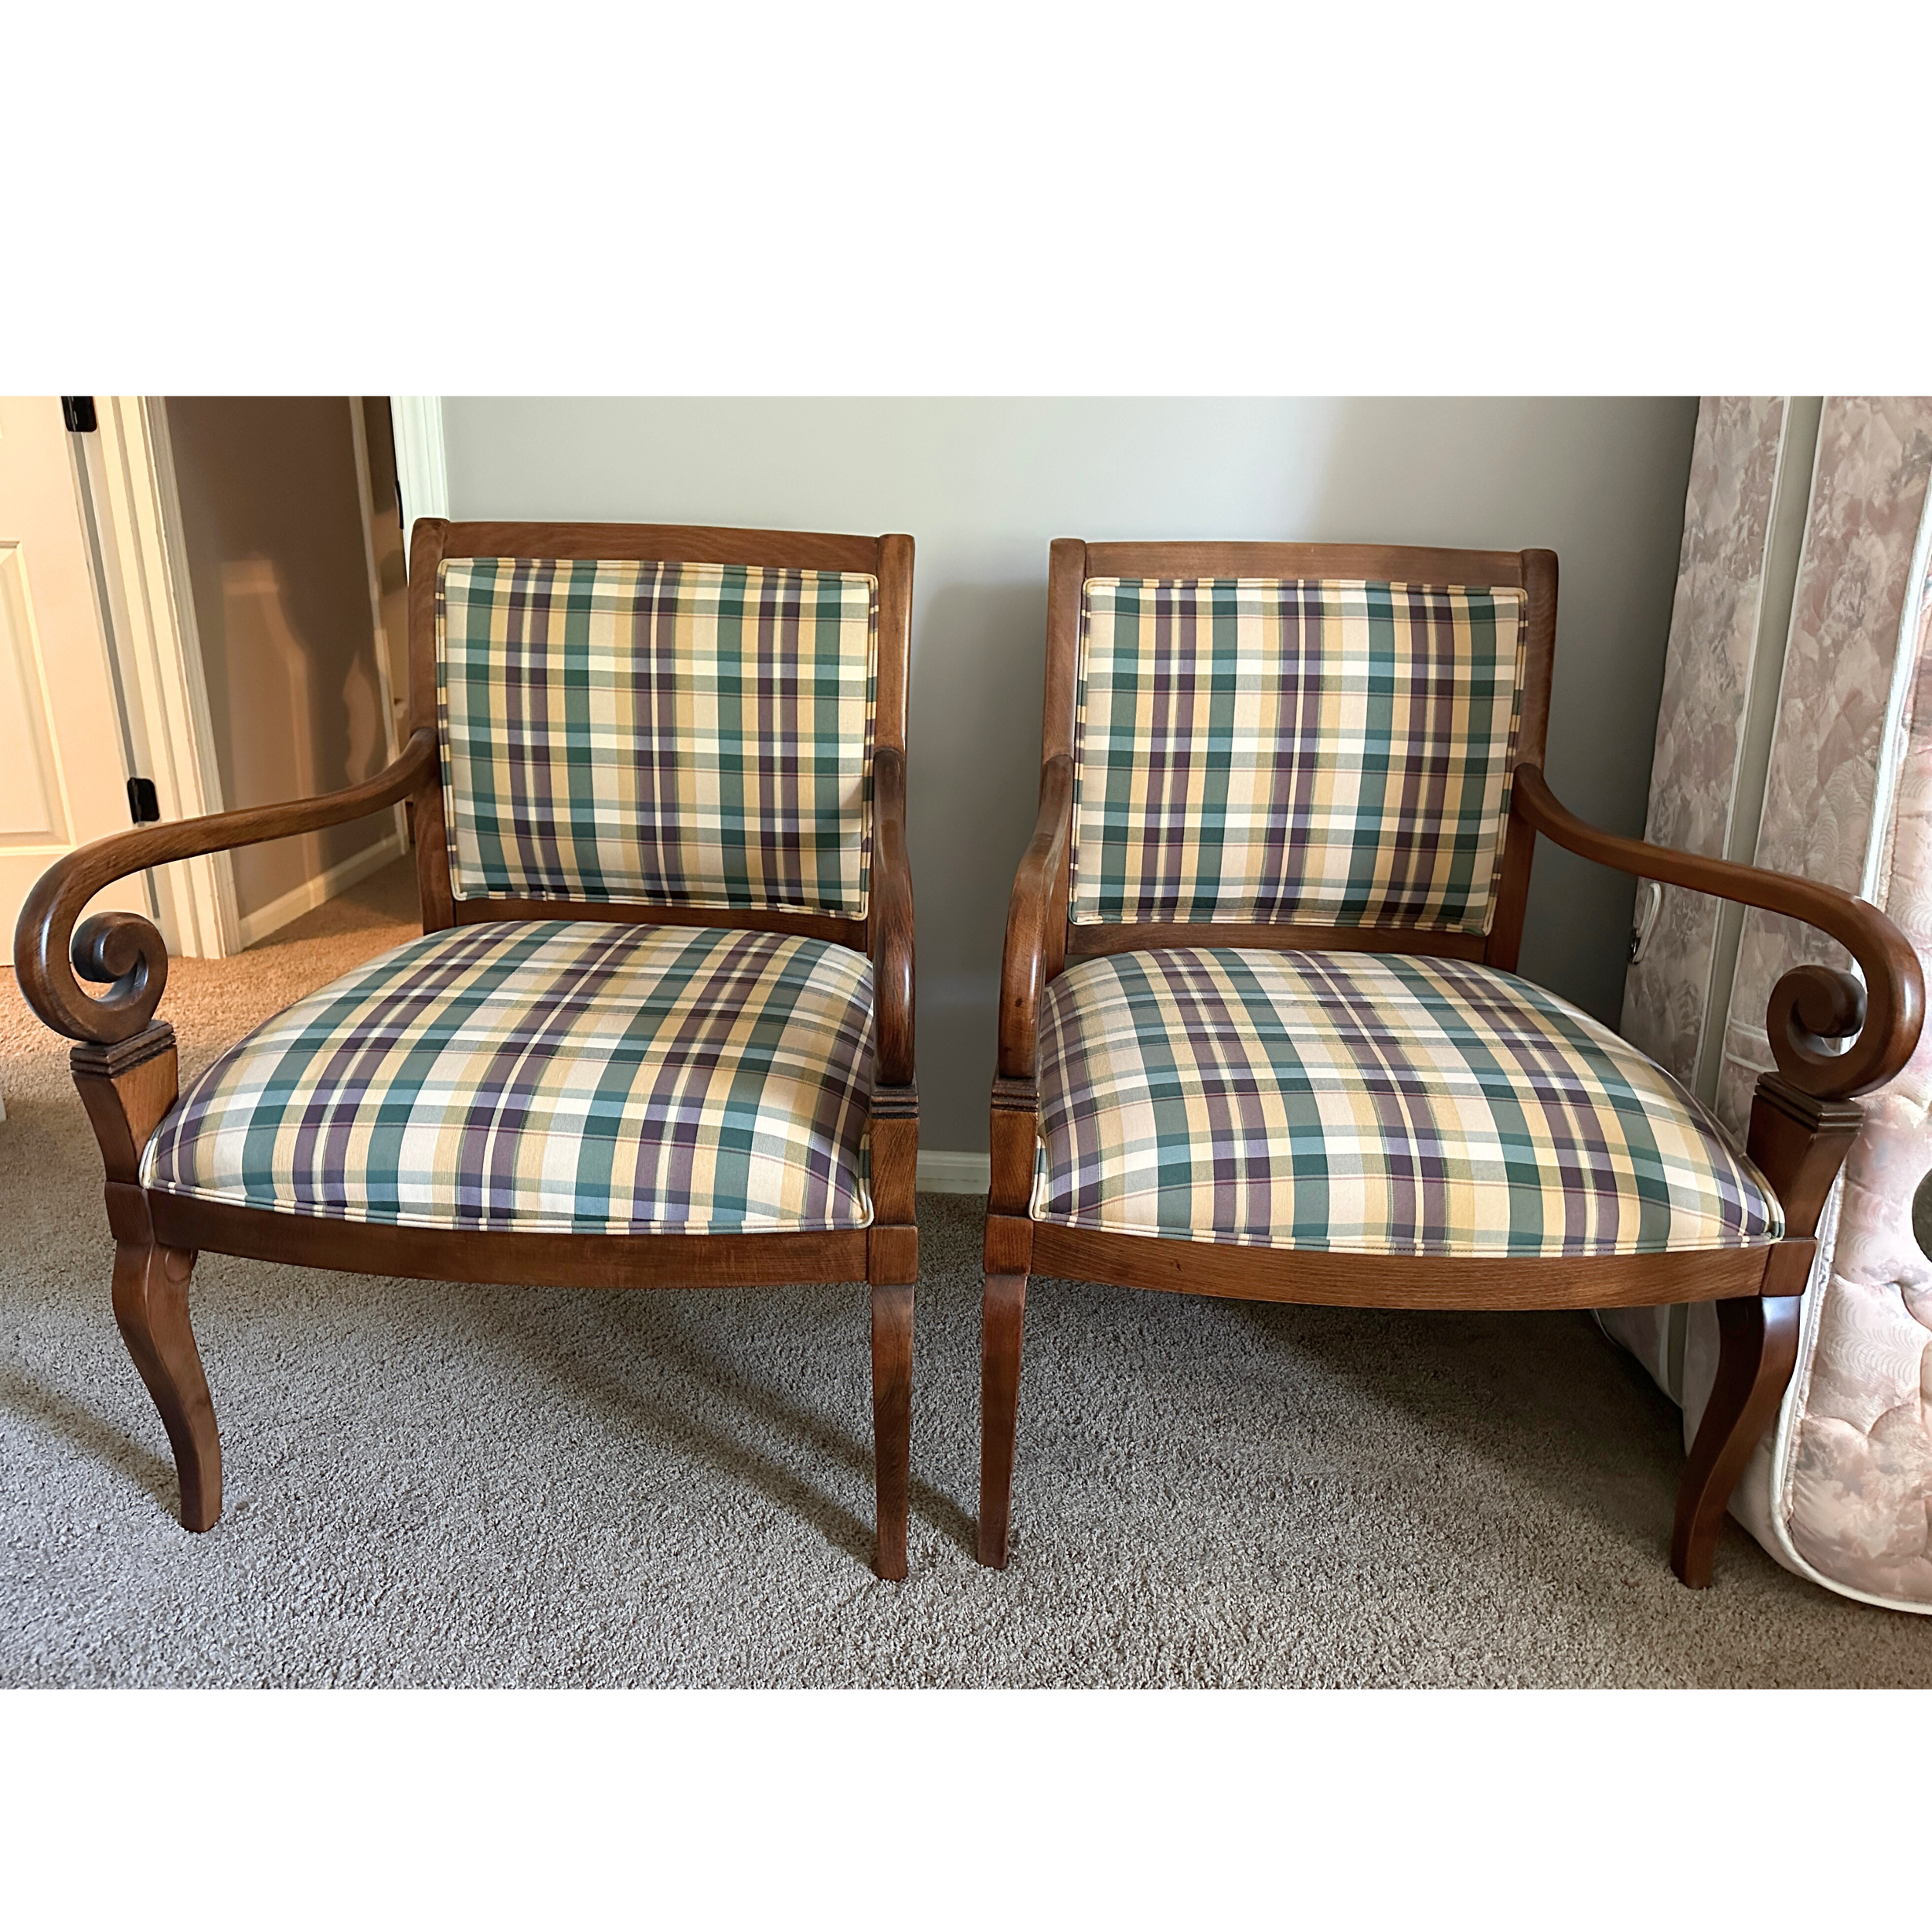 Pair of Ethan Allen Regency Style Plaid Chairs